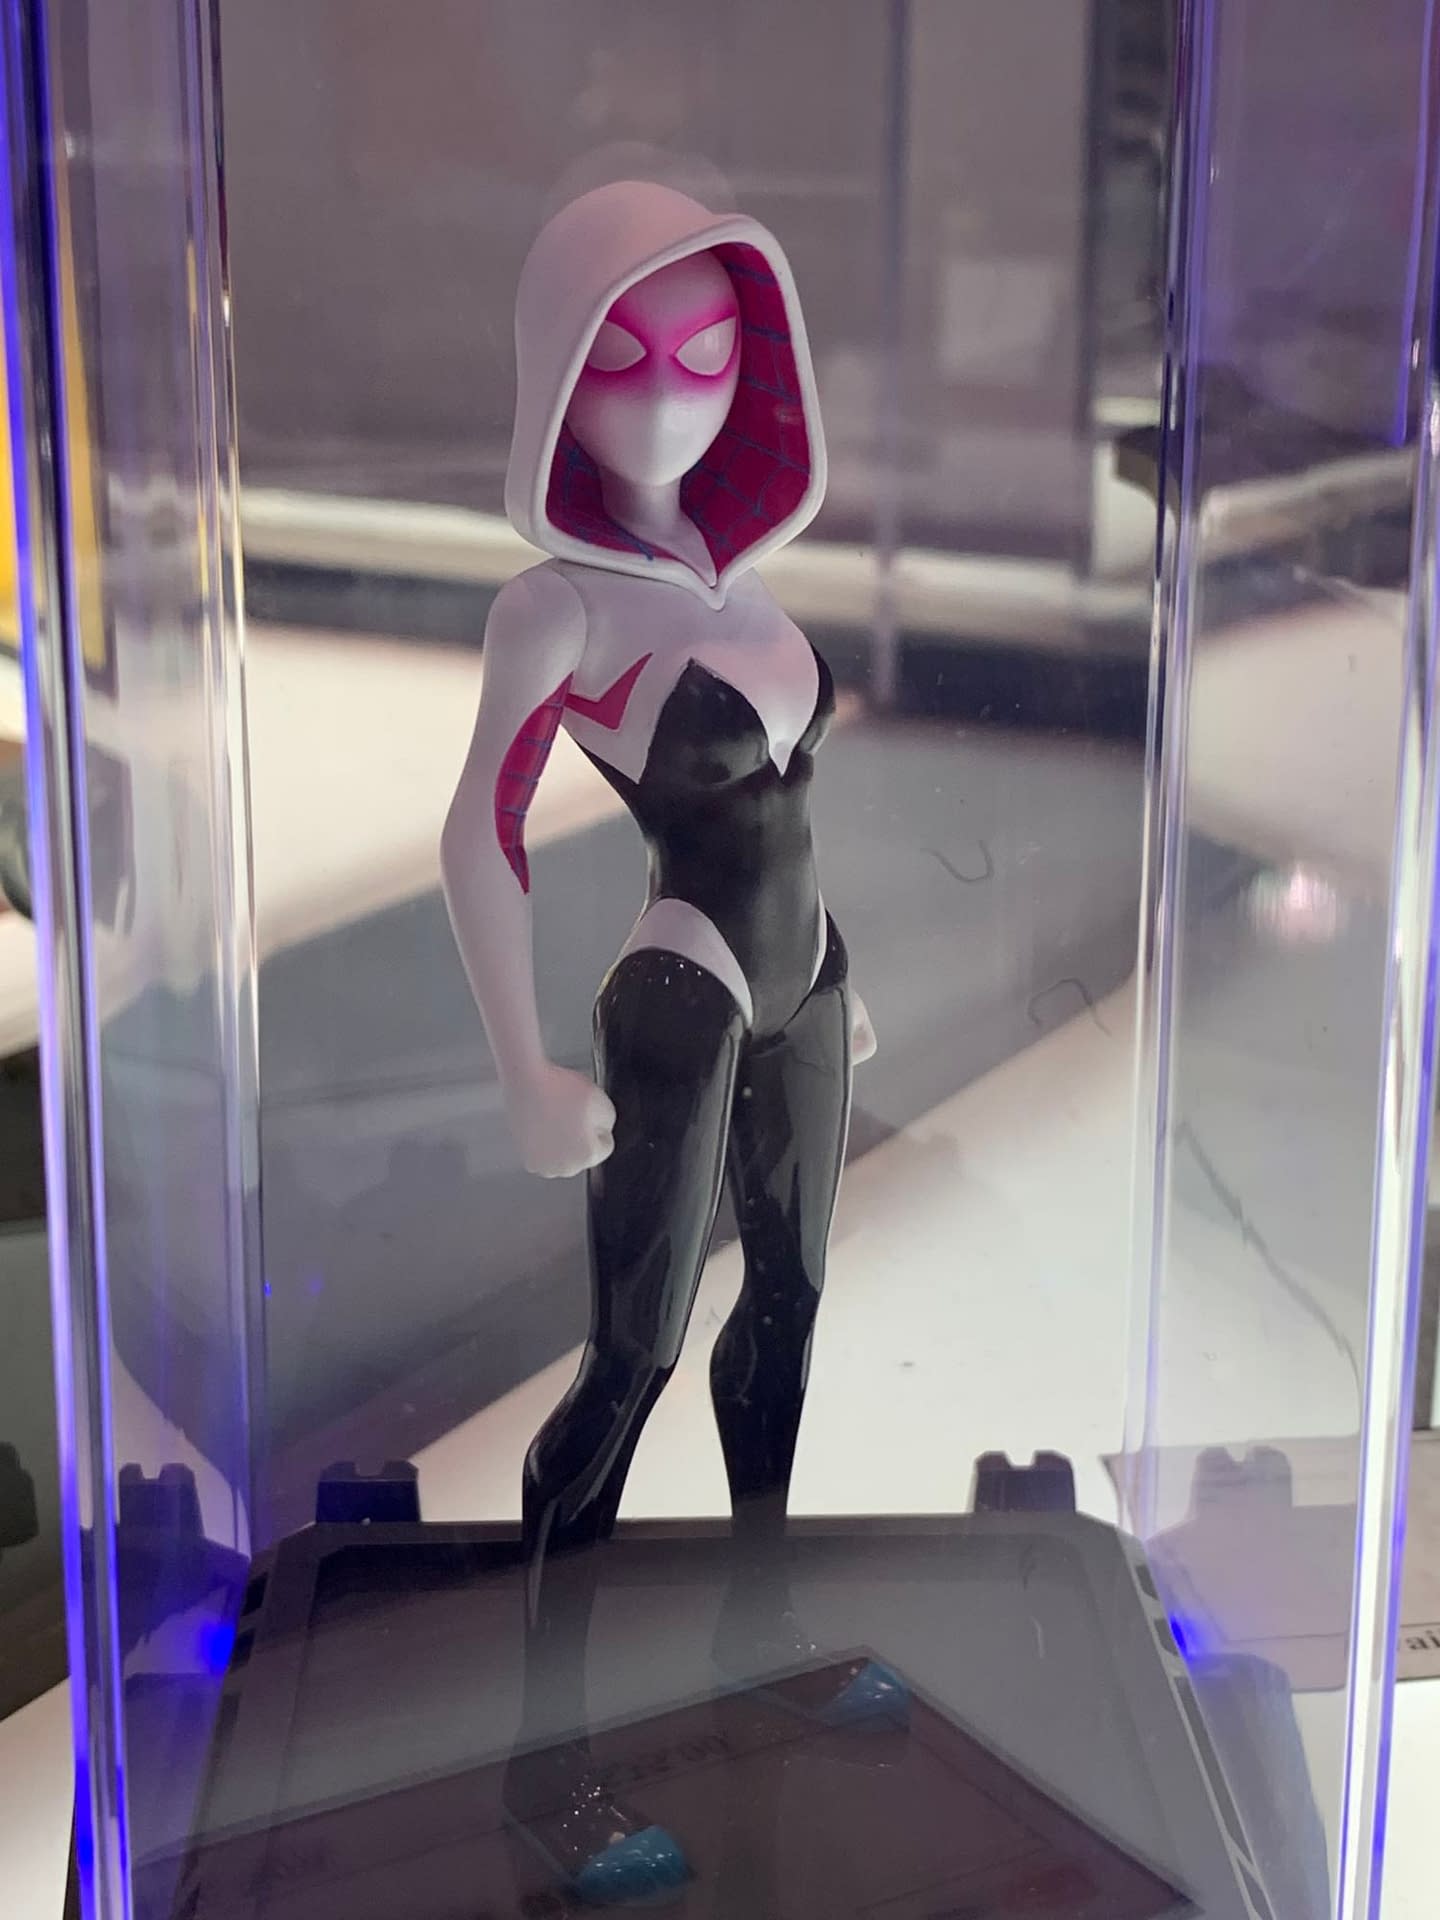 New York Toy Fair: 15 Photos from Storm Collectibles Booth